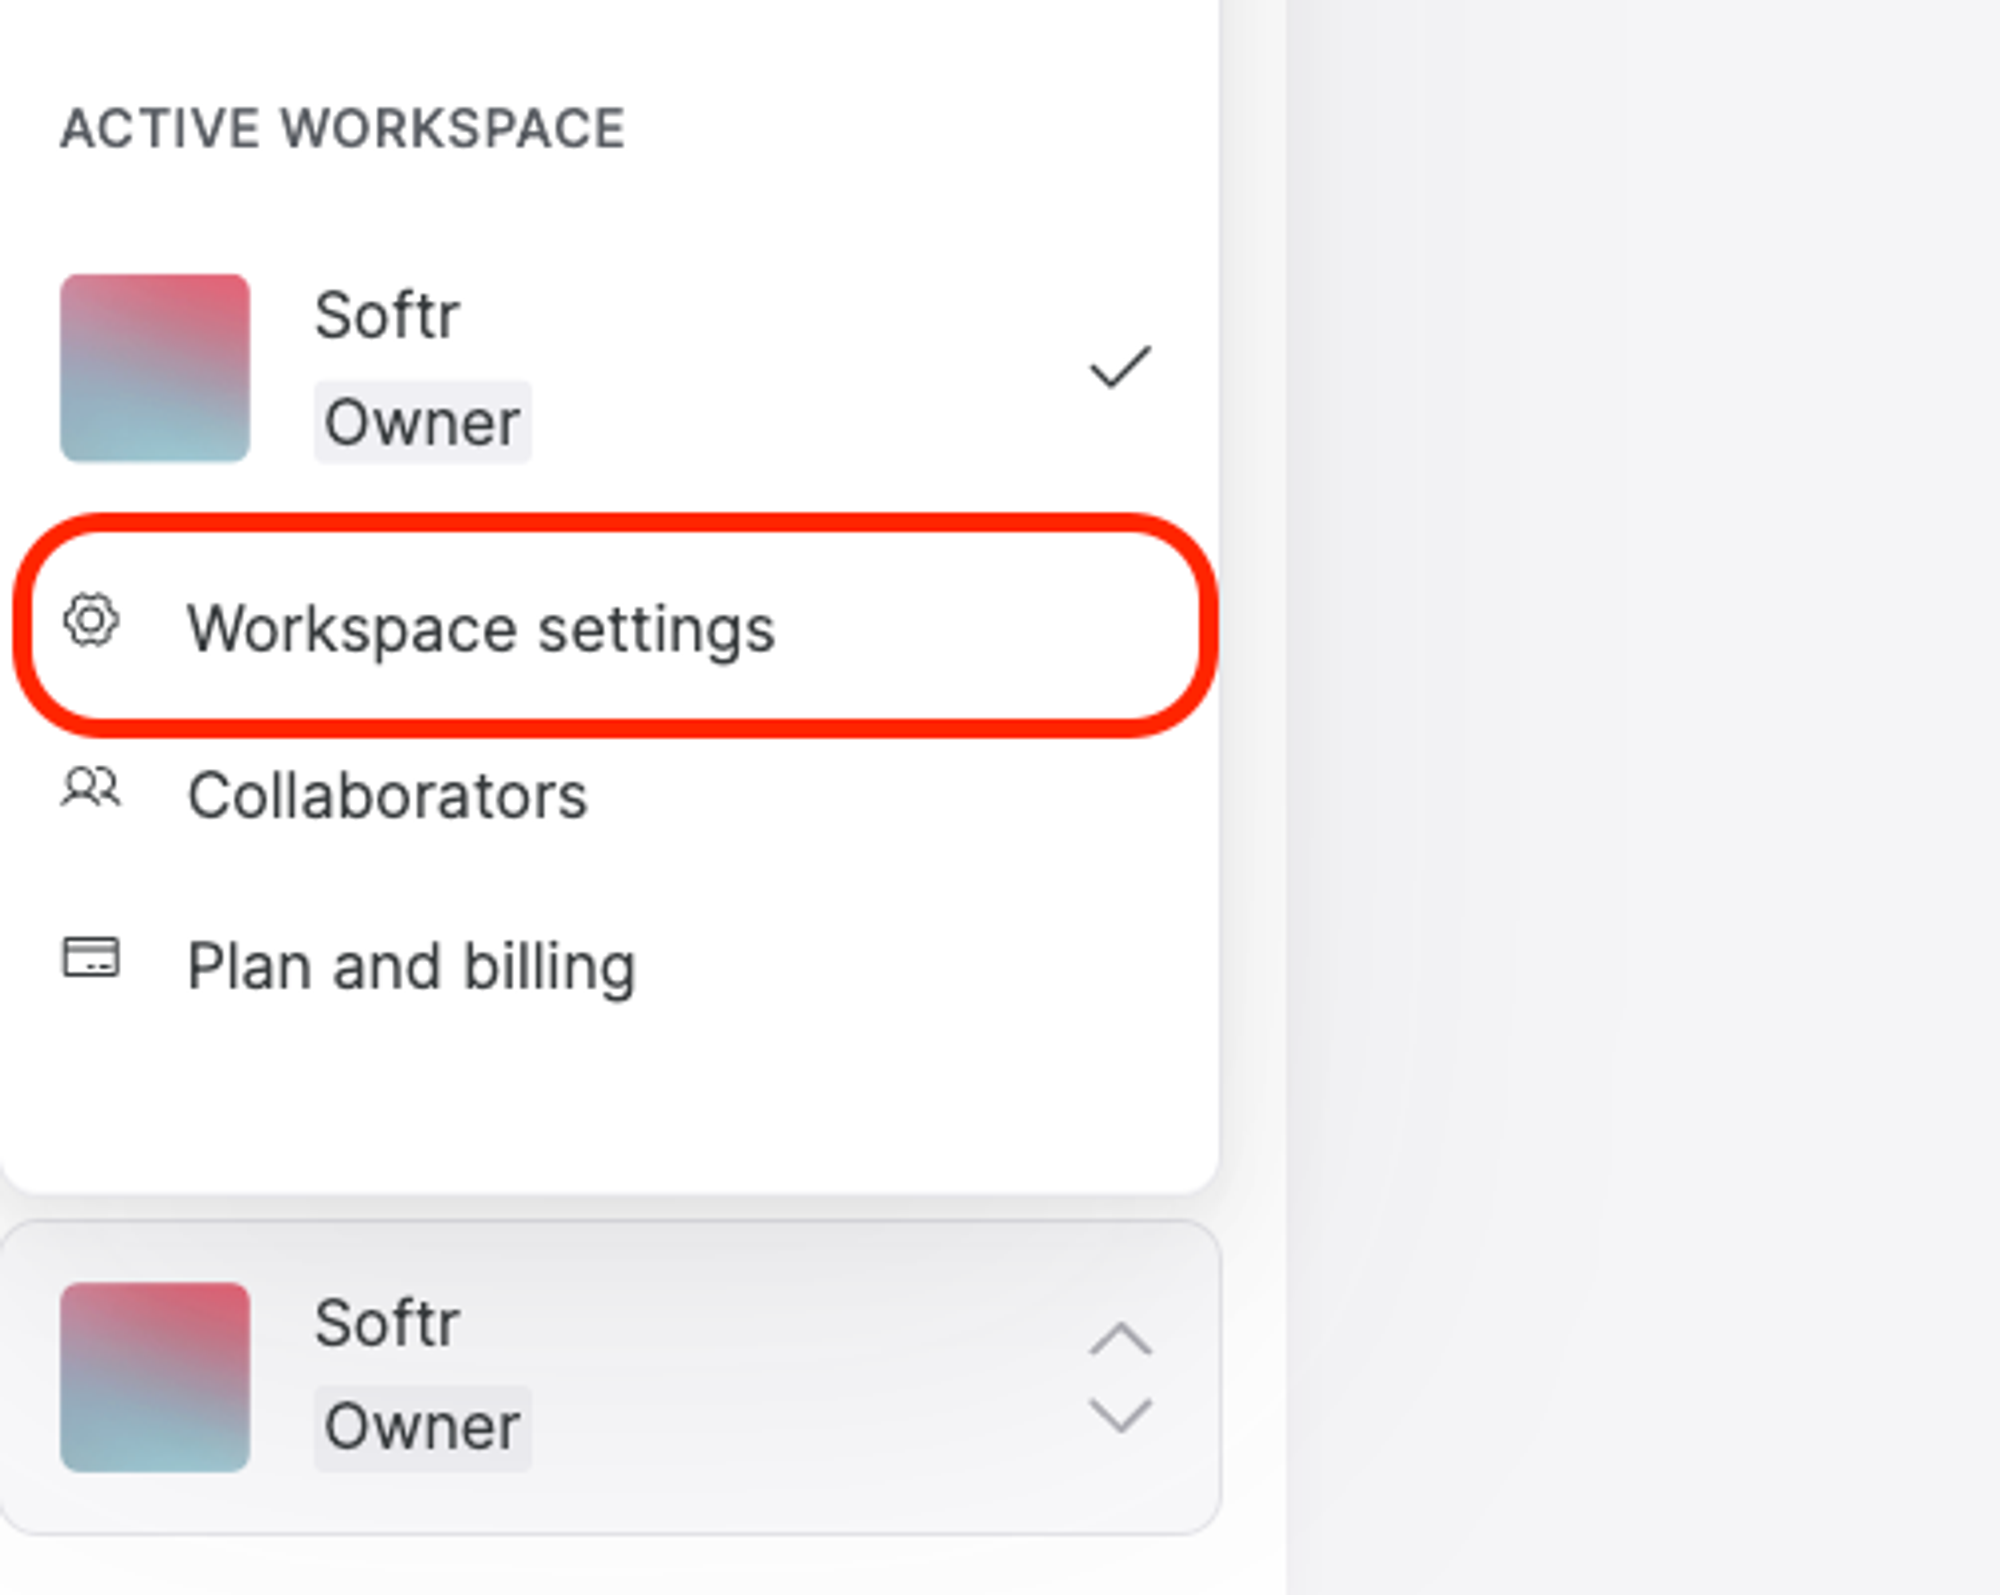 Click on workspace settings